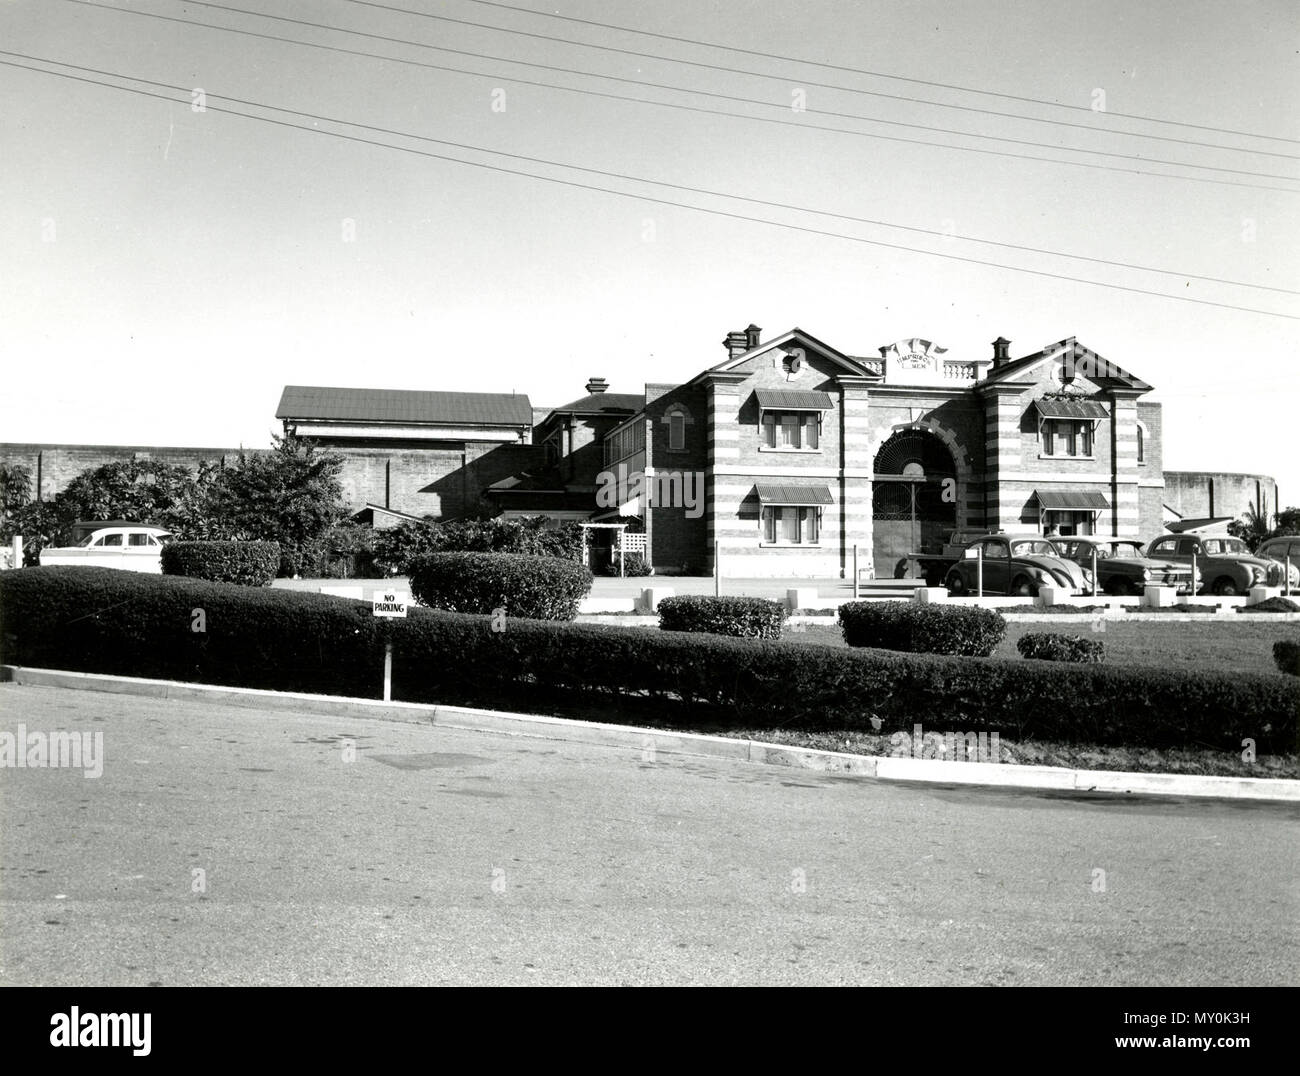 HM Prison Boggo Road, August 1965. From the Queensland Heritage Registerid=601033 ) .  Boggo Road Gaol No 2 Division was opened in 1903 as the State Prison for Women at Boggo Road South Brisbane.  It was built adjacent to a male prison, which was established on the site in 1883. The male prison was later to become No 1 Division. The female prison was constructed in response to a 1887 Parliamentary Inquiry, which recommended that the separate system be introduced, that is a separate cell for each prisoner. The Inquiry also recommended that a female section be established within the Brisbane Gao Stock Photo